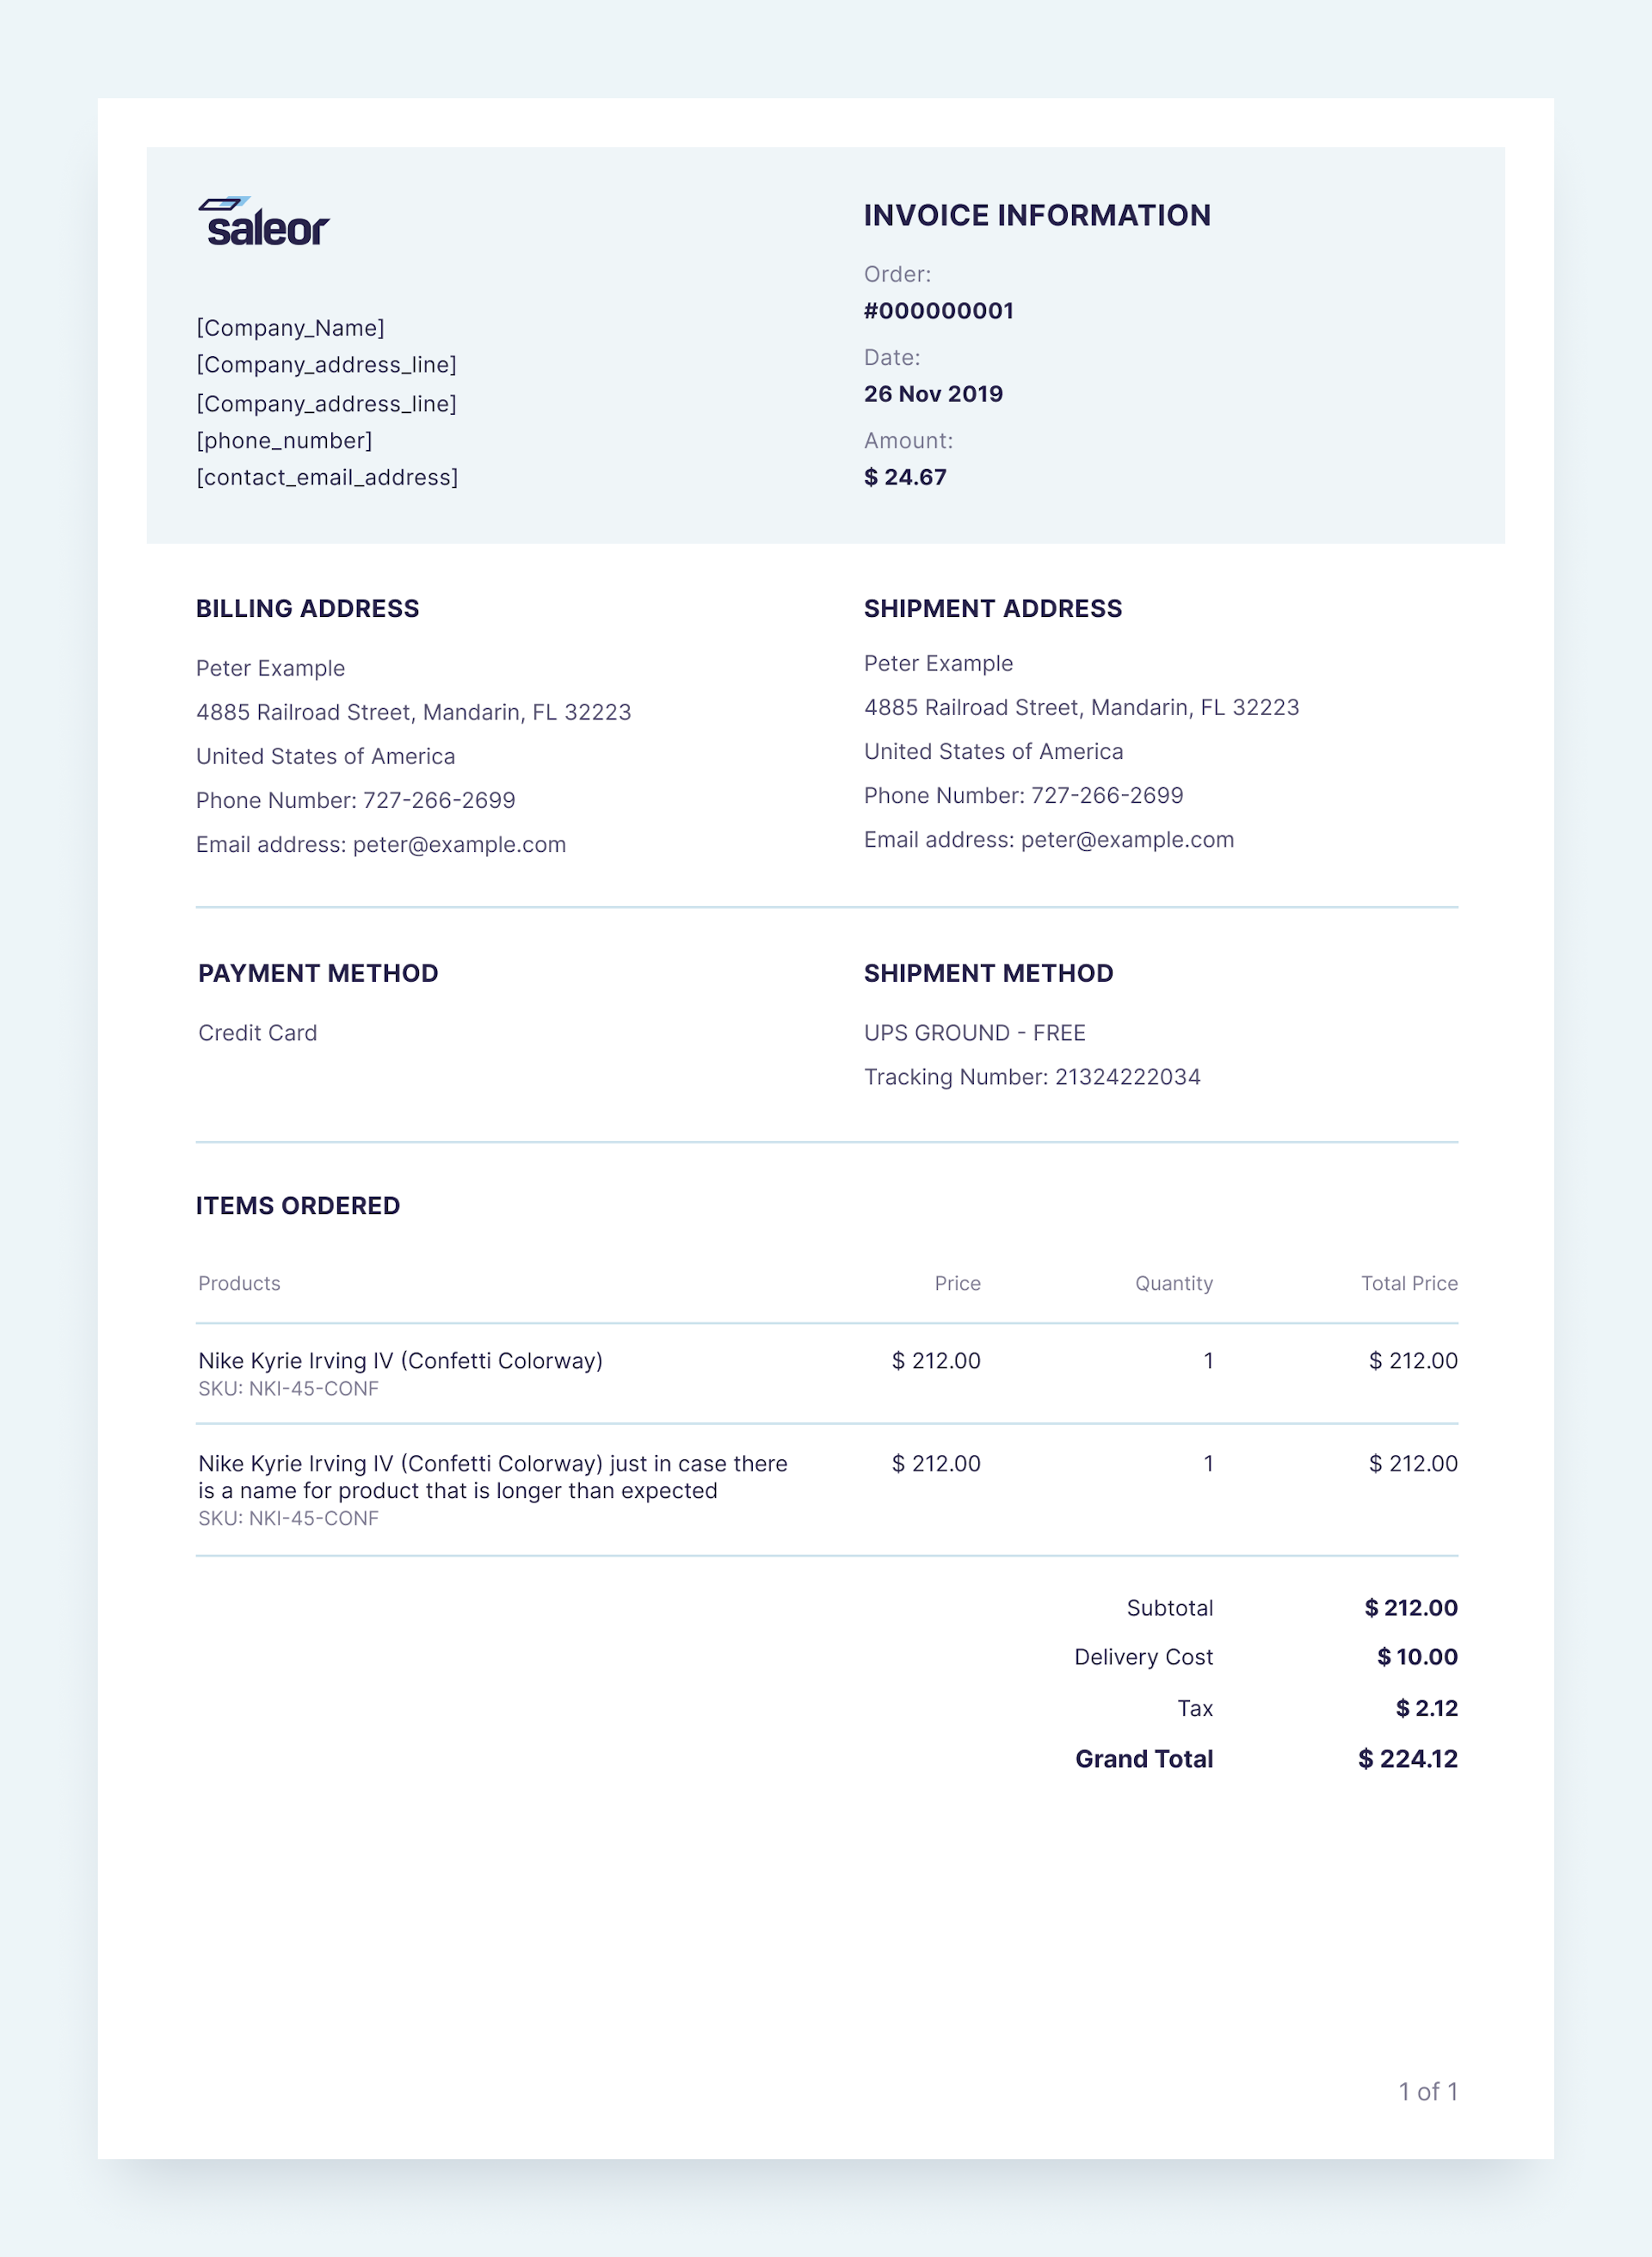 An example of an invoice